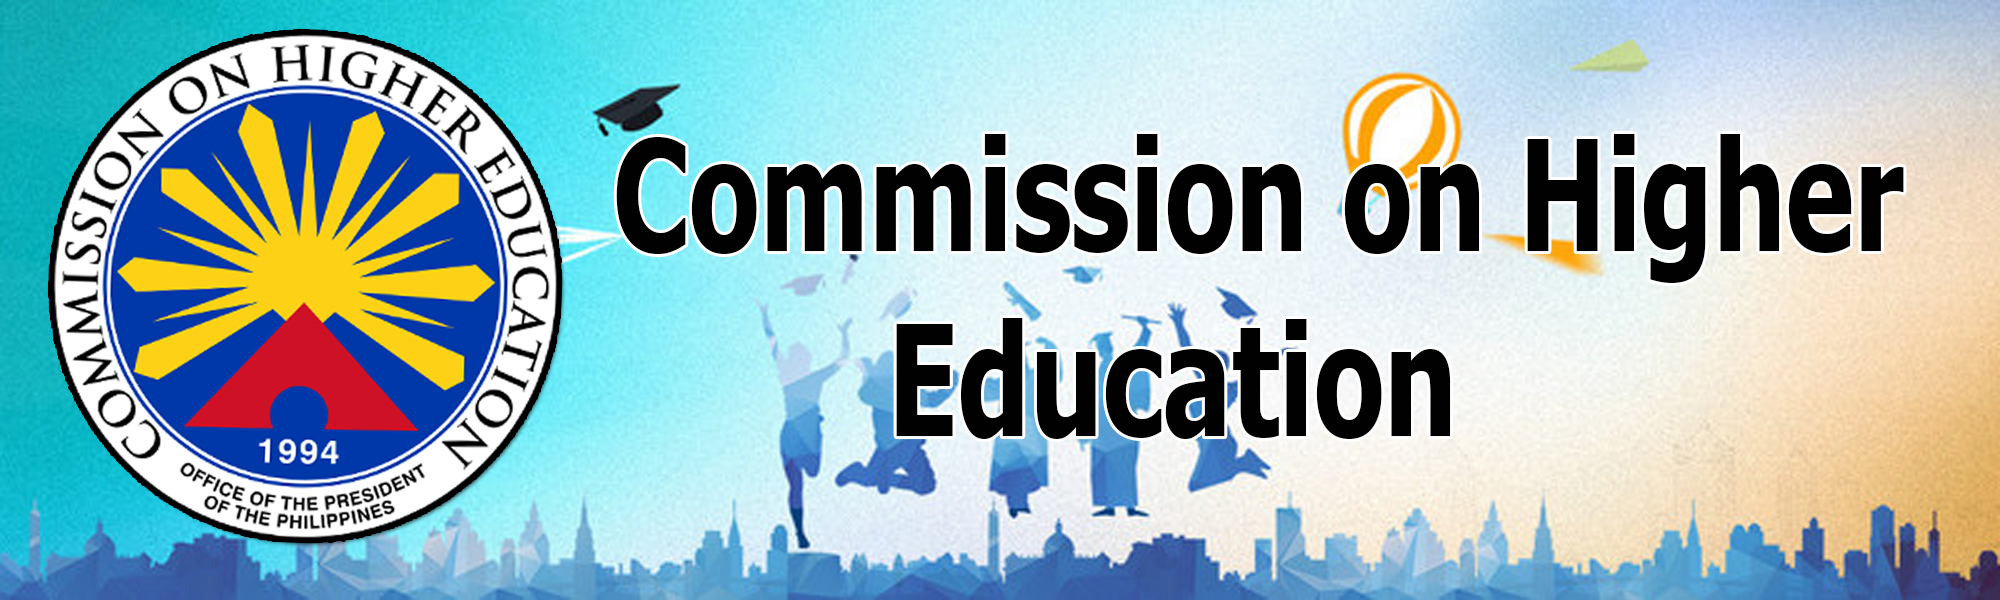 commision on higher education